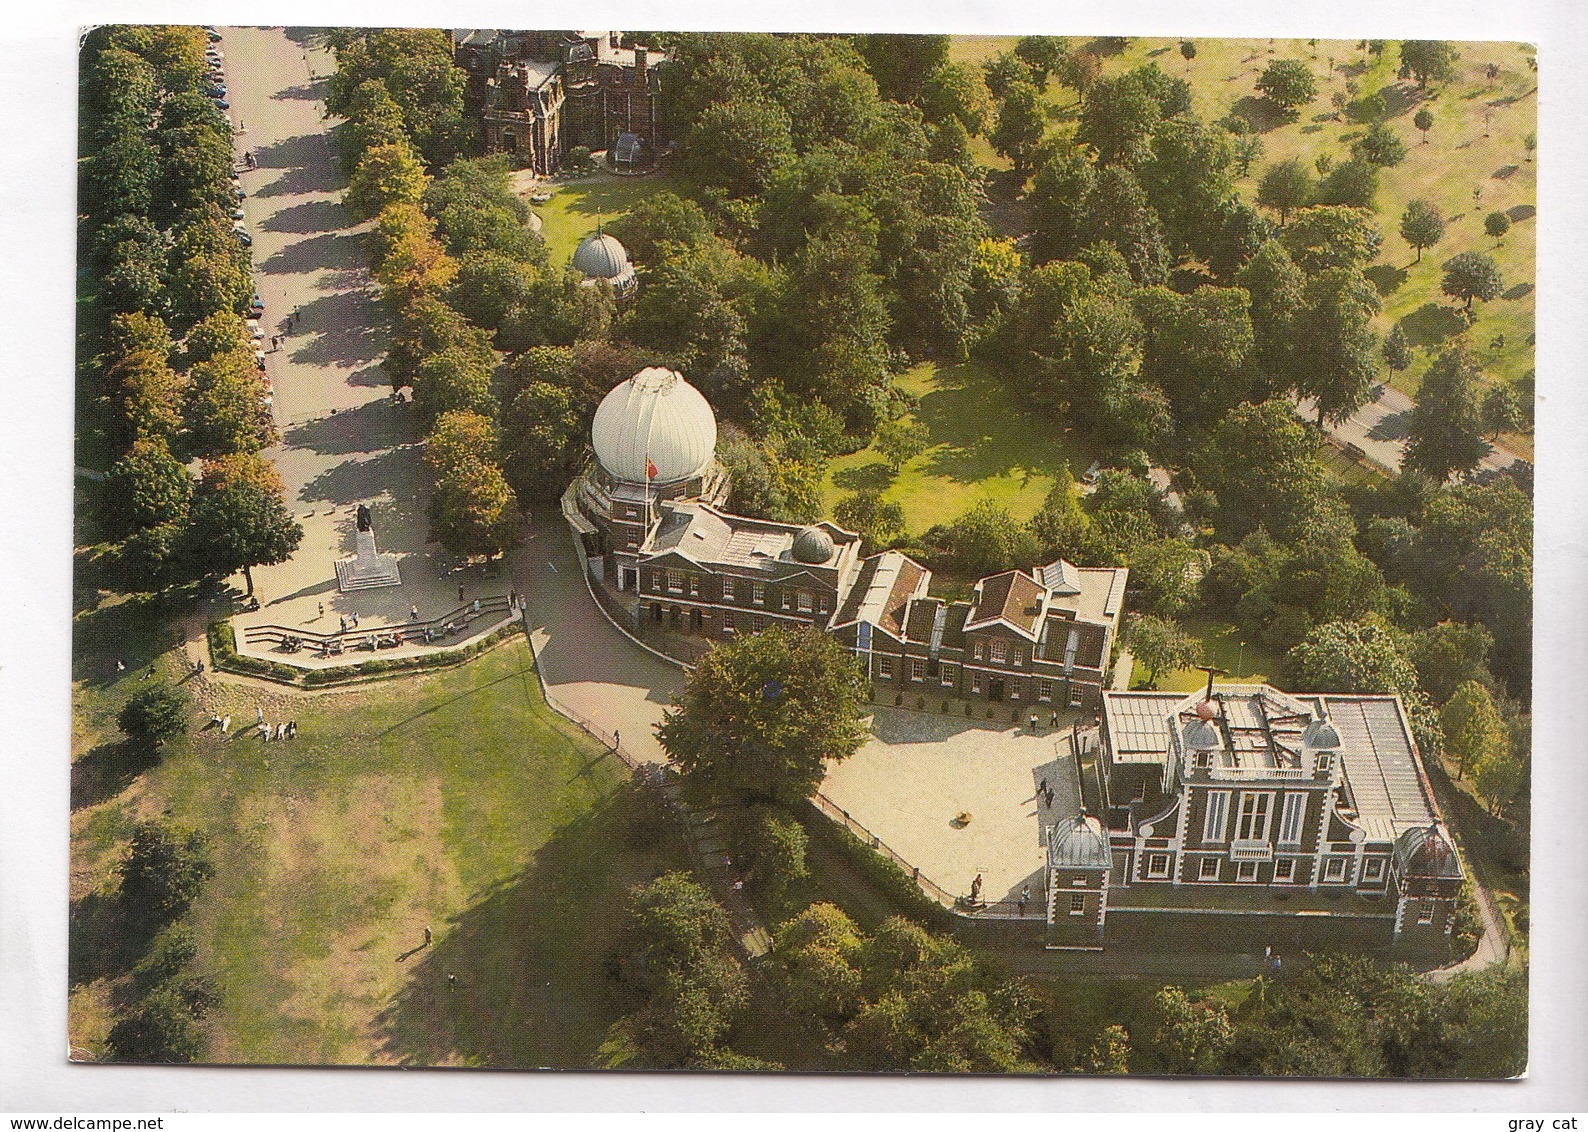 The Old Royal Observatory, Greenwich From The Air, UK, Unused Postcard [22694] - London Suburbs